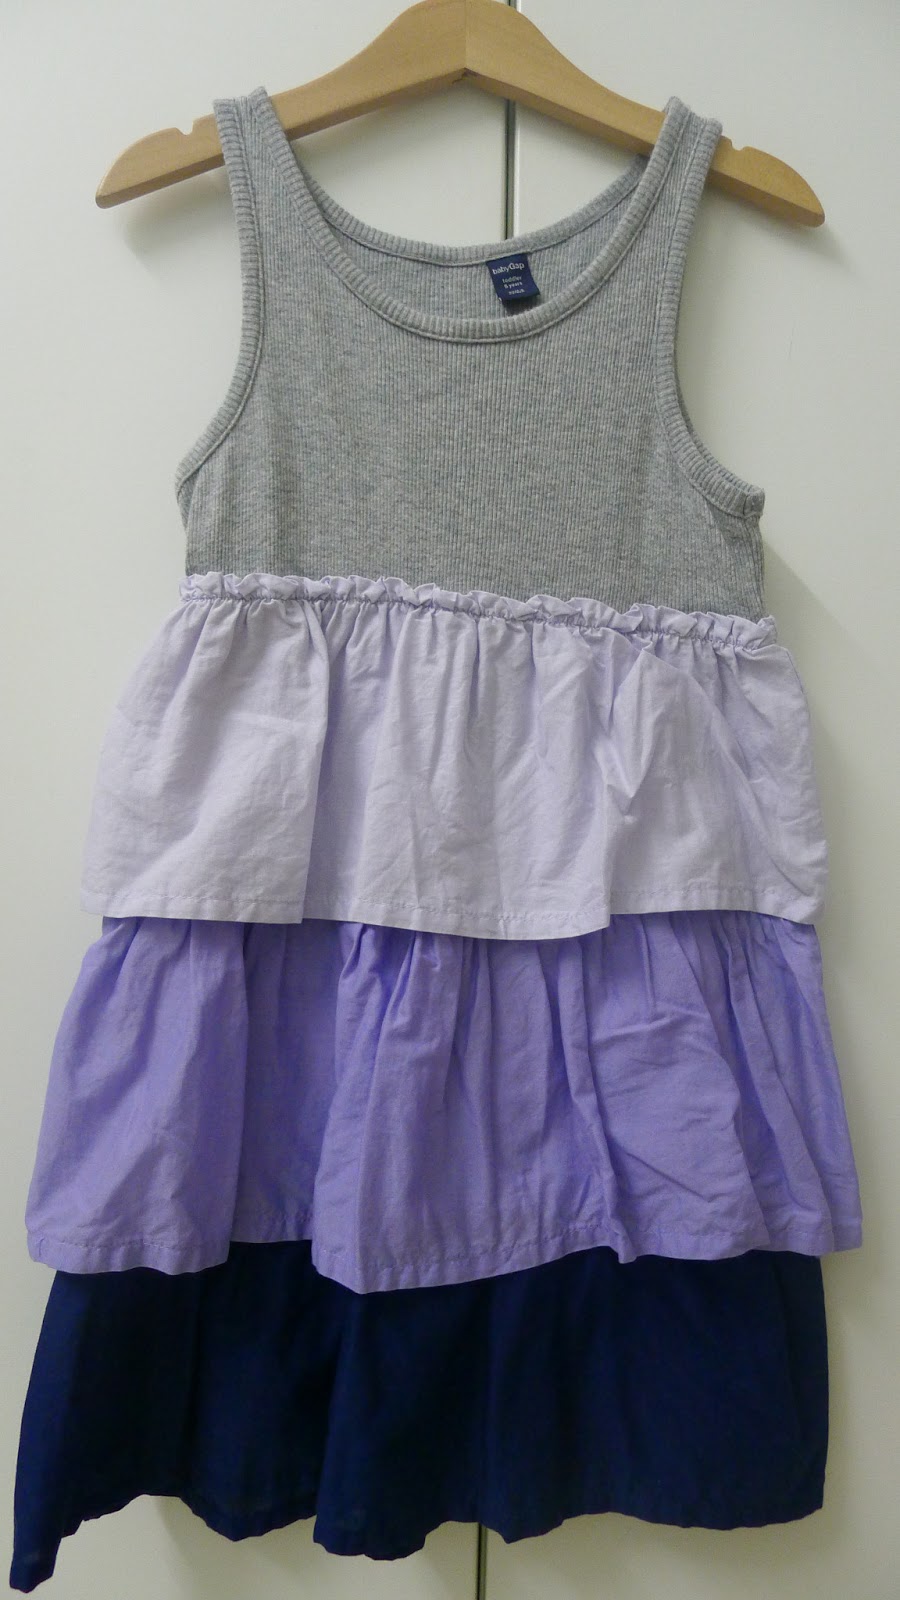 My Angel Closet: Girls Preloved Clothing for Sale